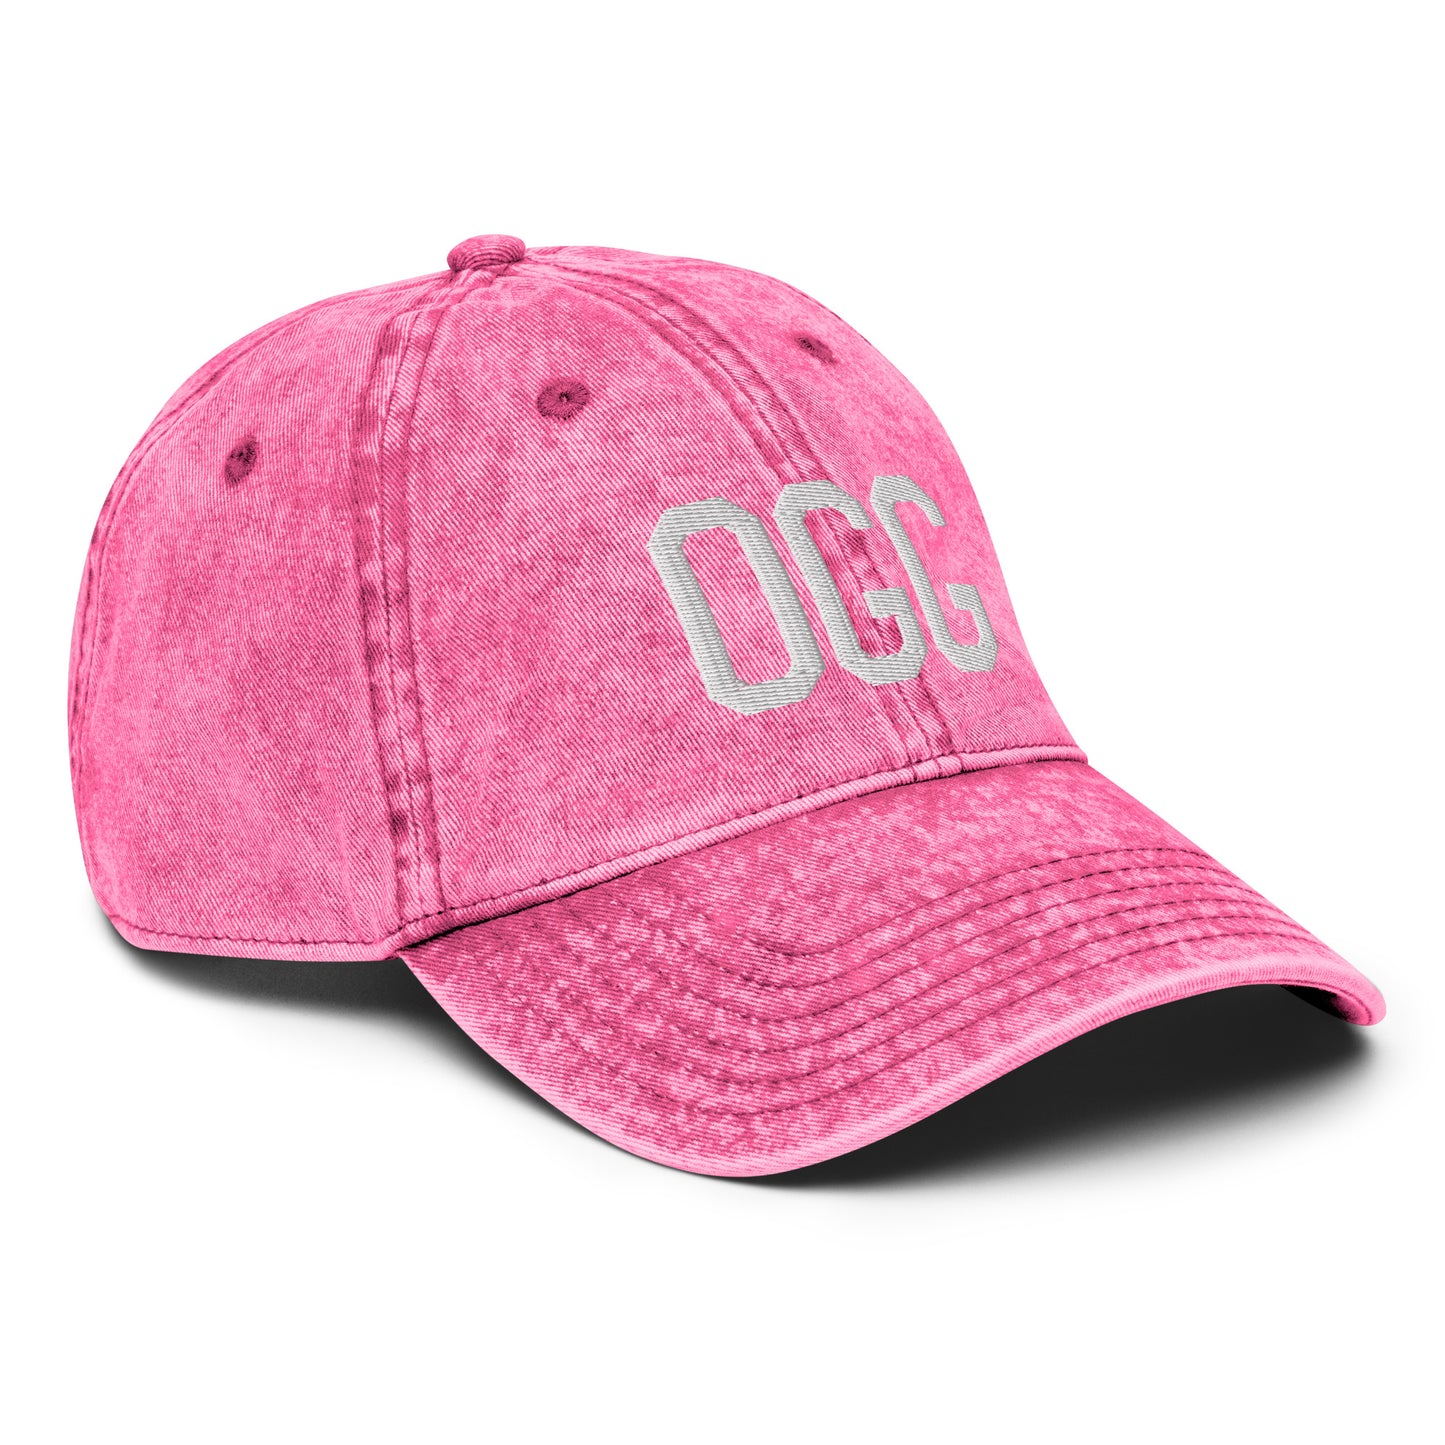 Airport Code Twill Cap - White • OGG Maui • YHM Designs - Image 27